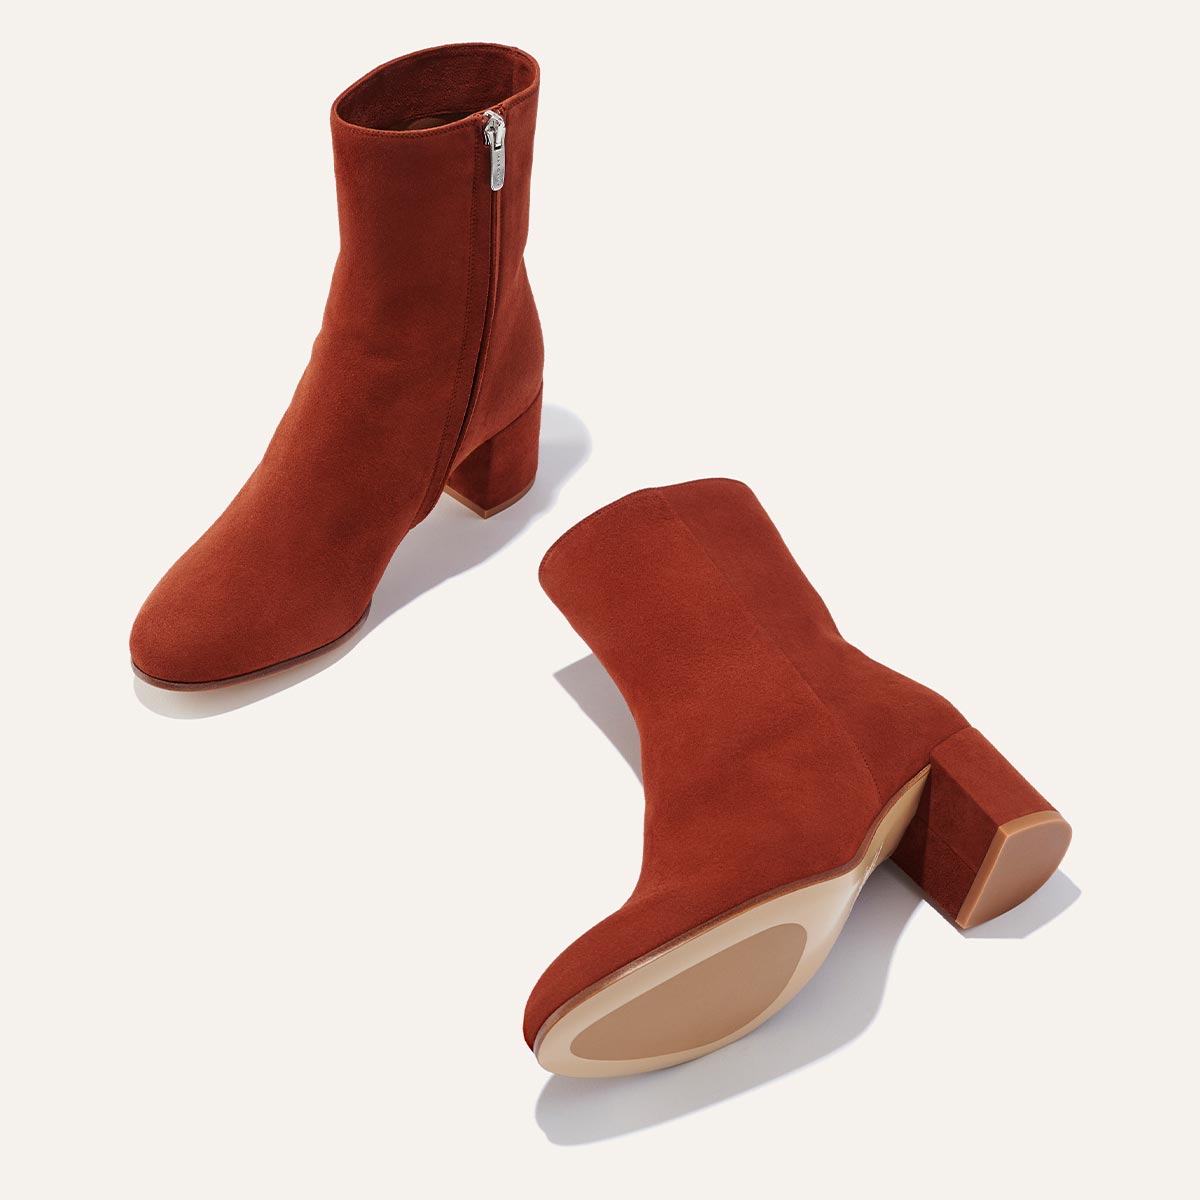 The Boot - Brandy Suede